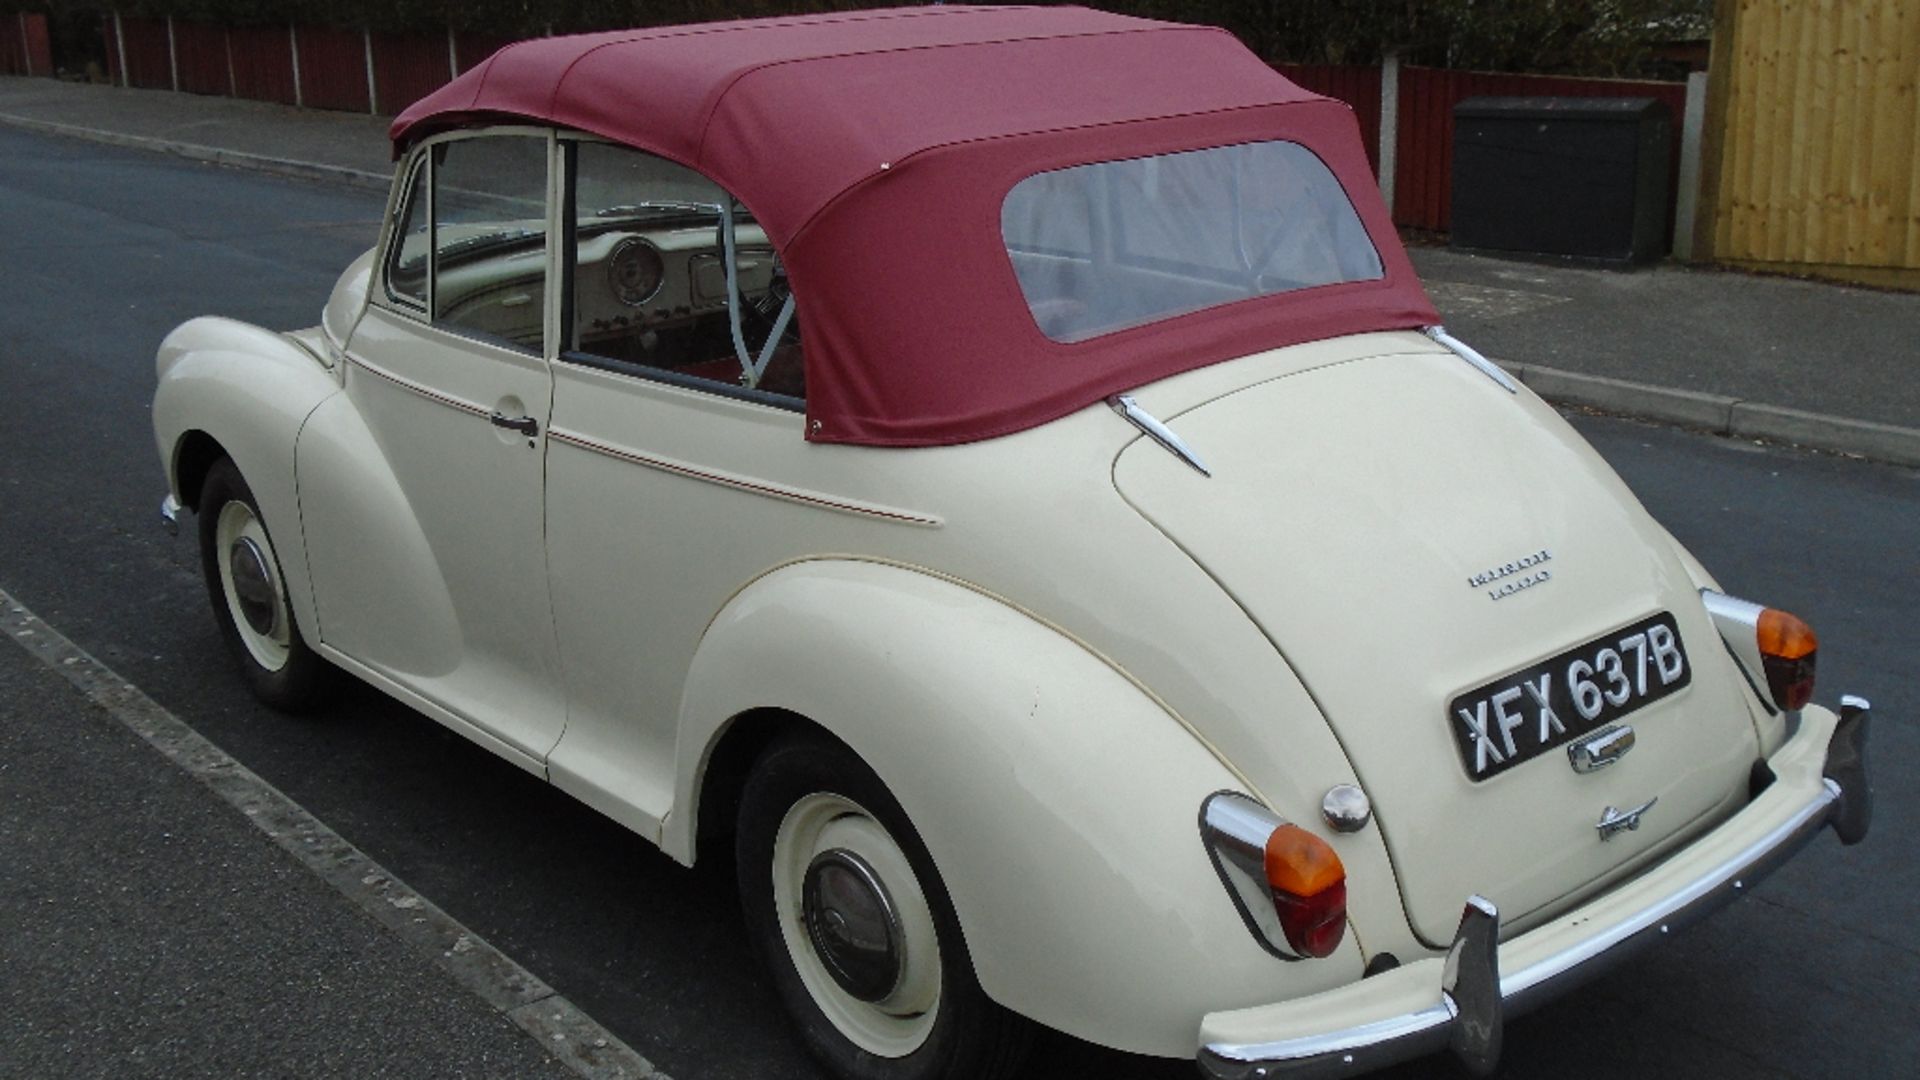 A 1964 Morris Minor replica convertible, registration number XFX 637B, Old English white. This - Image 2 of 2